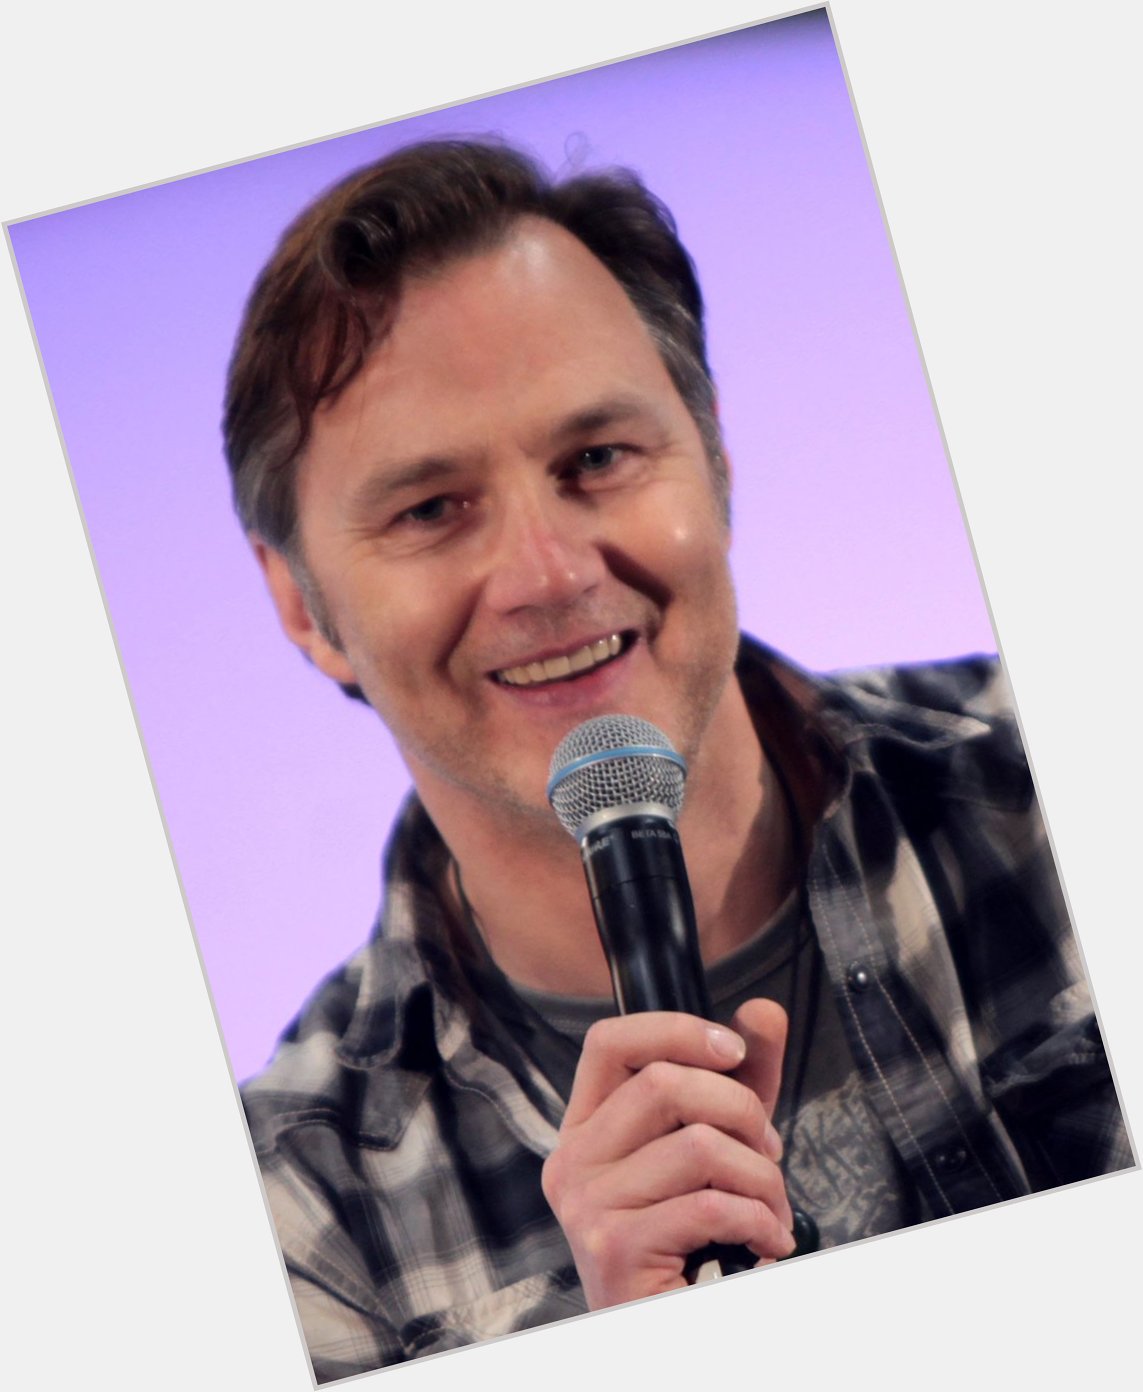 Happy birthday to actor David Morrissey who was born on this day in Liverpool in 1964.  